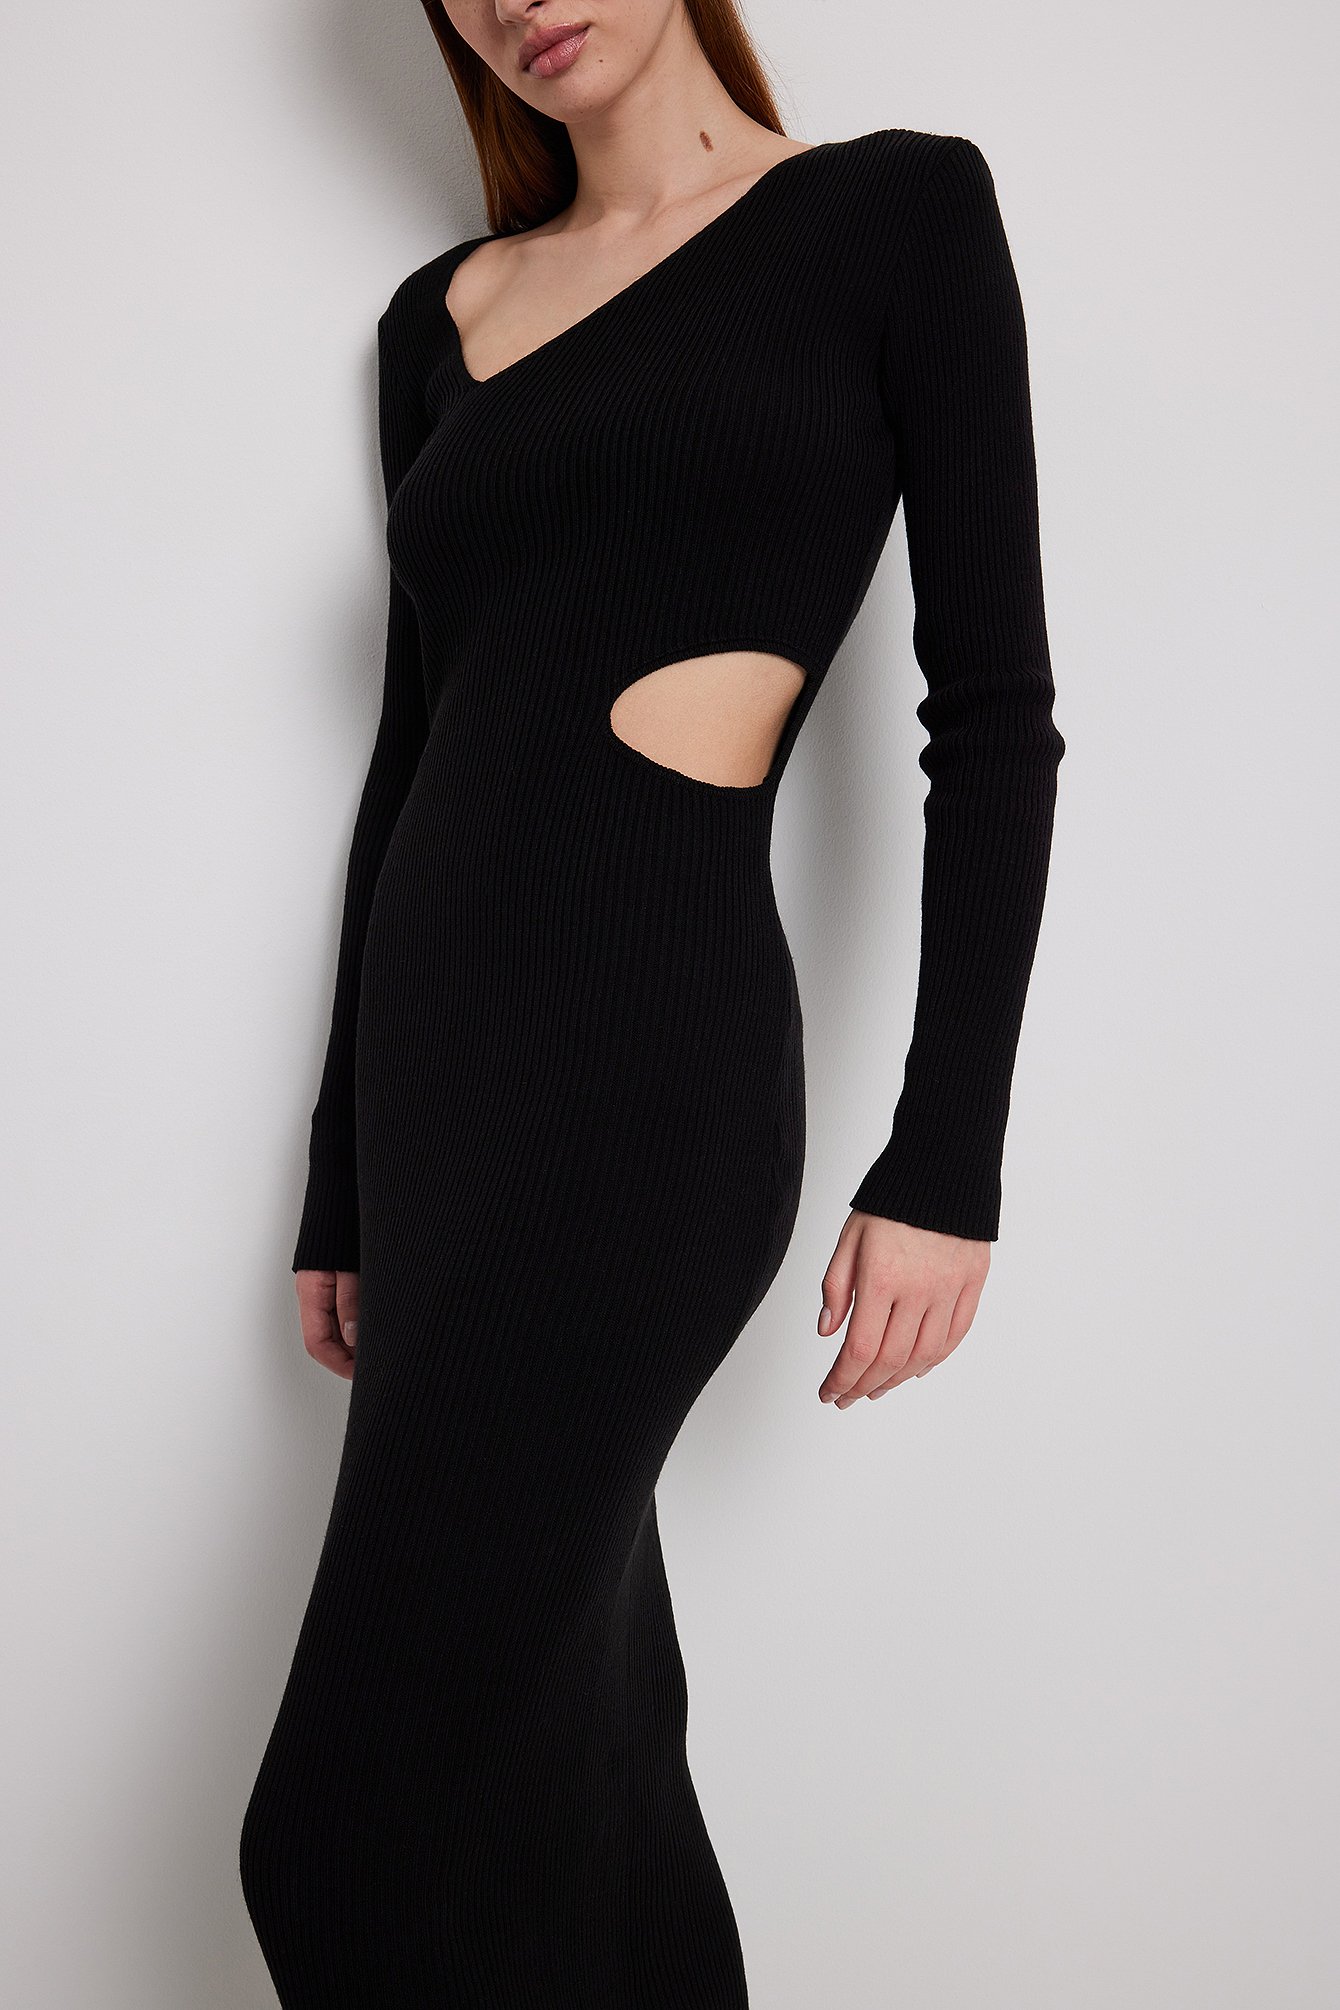 Black Knitted Cut Out Detail Maxi Dress